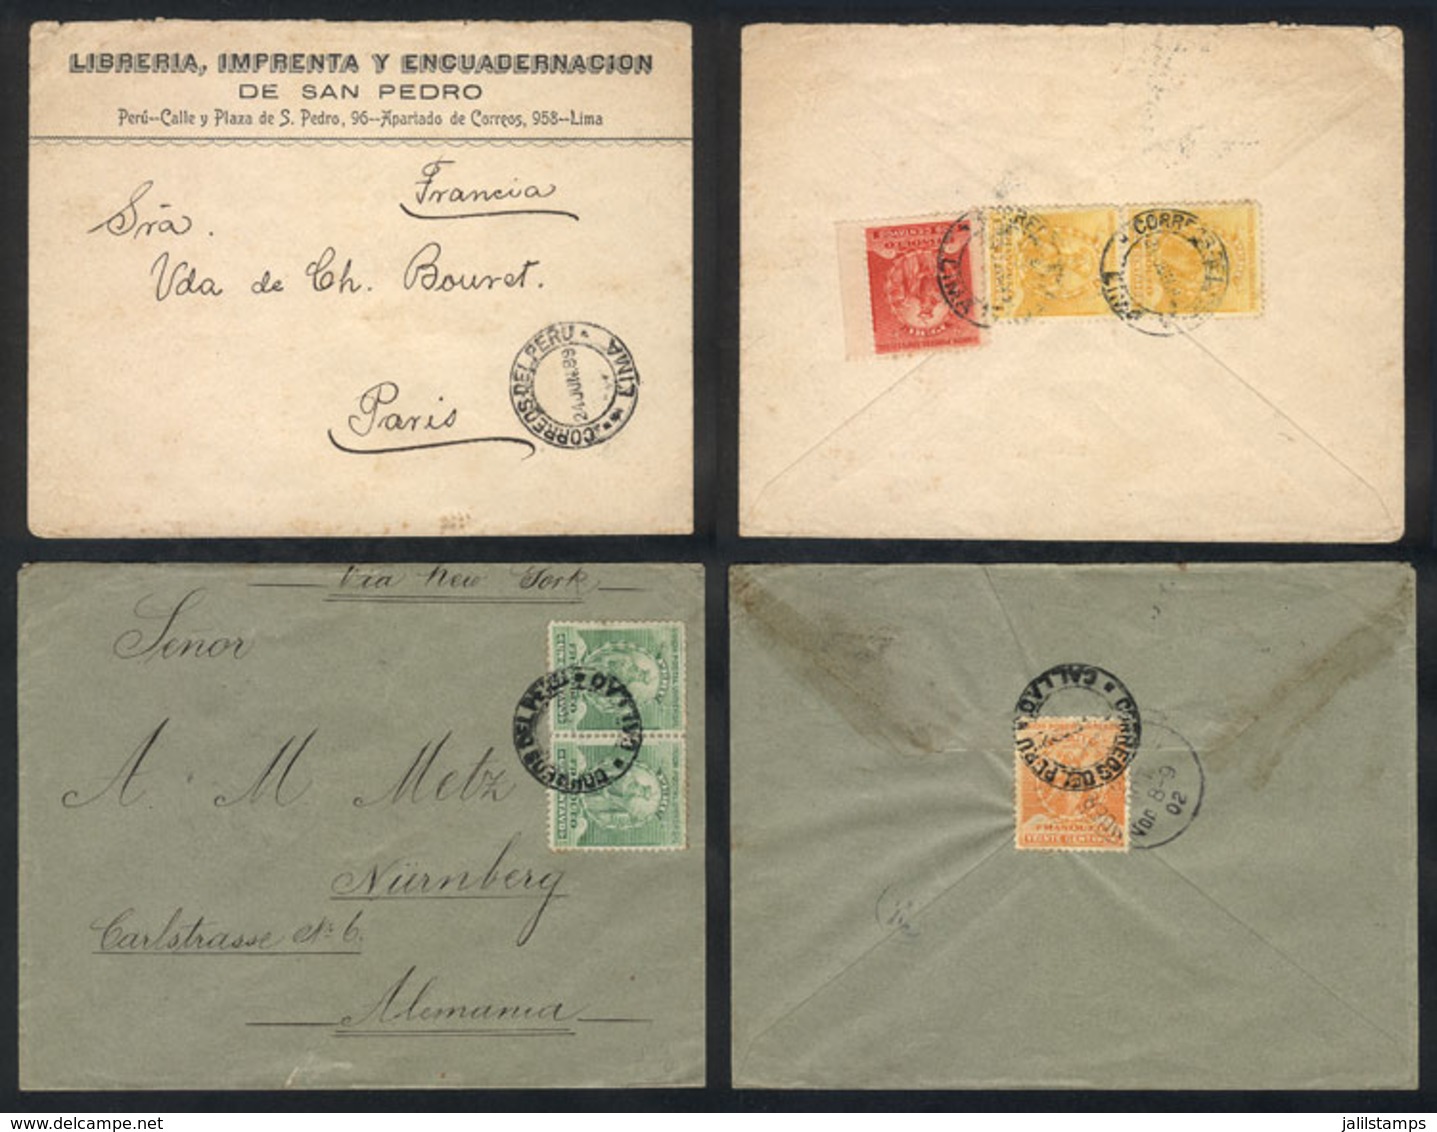 PERU: 2 Covers Sent To France And Germany In 1899 And 1902 Franked With 22c. Rates, VF Quality! - Peru